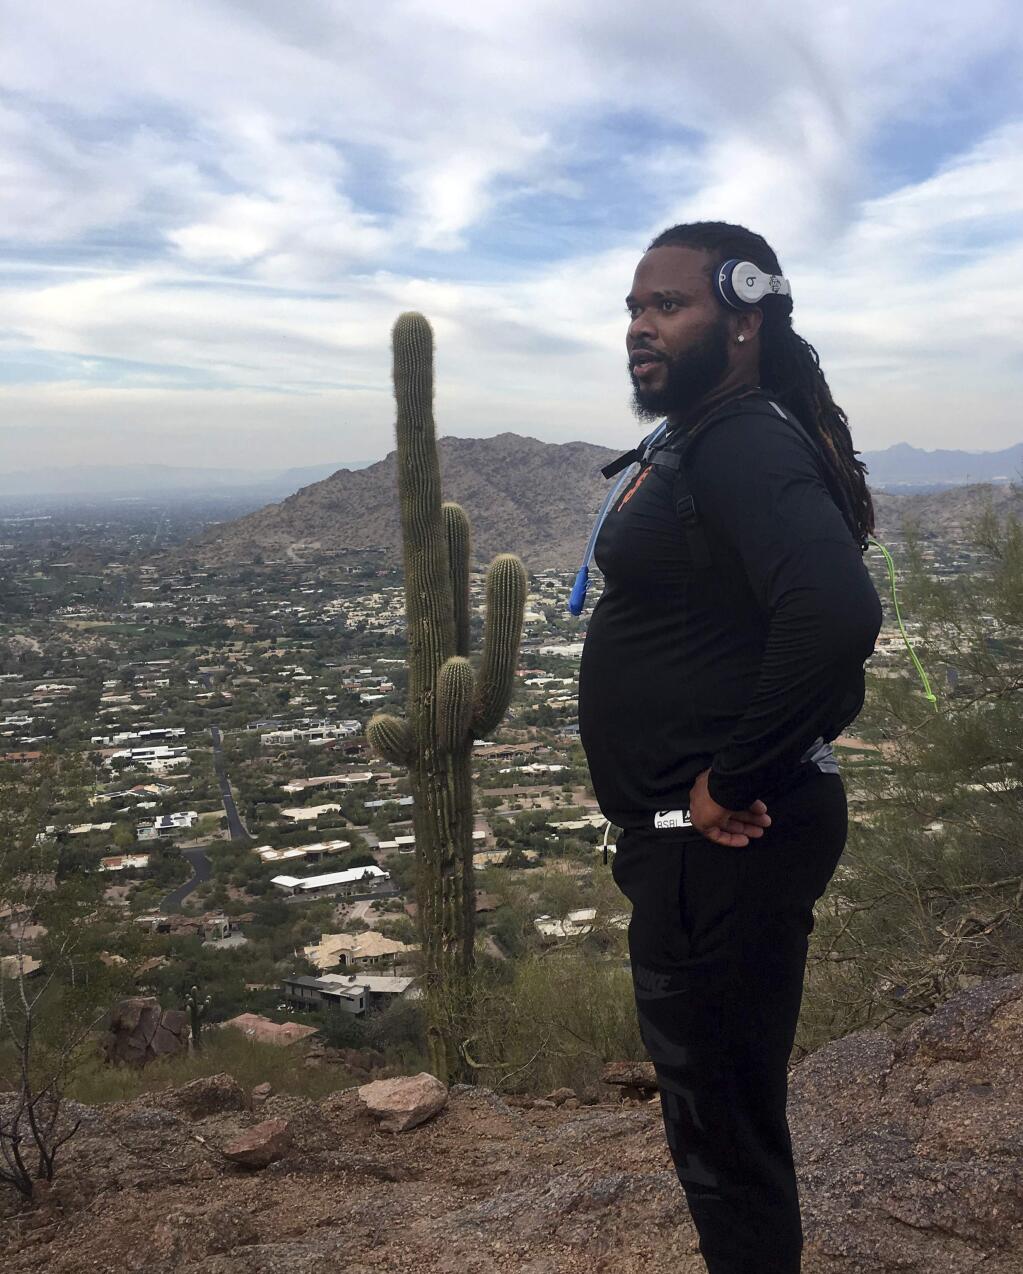 In this photo from Thursday, Feb. 15, 2018, San Francisco Giants pitcher Johnny Cueto stands atop Camelback Mountain in Scottsdale, Ariz. In each of his three springs with San Francisco, Cueto has picked a rental home nearby Camelback, on a different side of the idyllic landmark every year to be close by his favorite hiking terrain. (AP Photo/Janie McCauley)